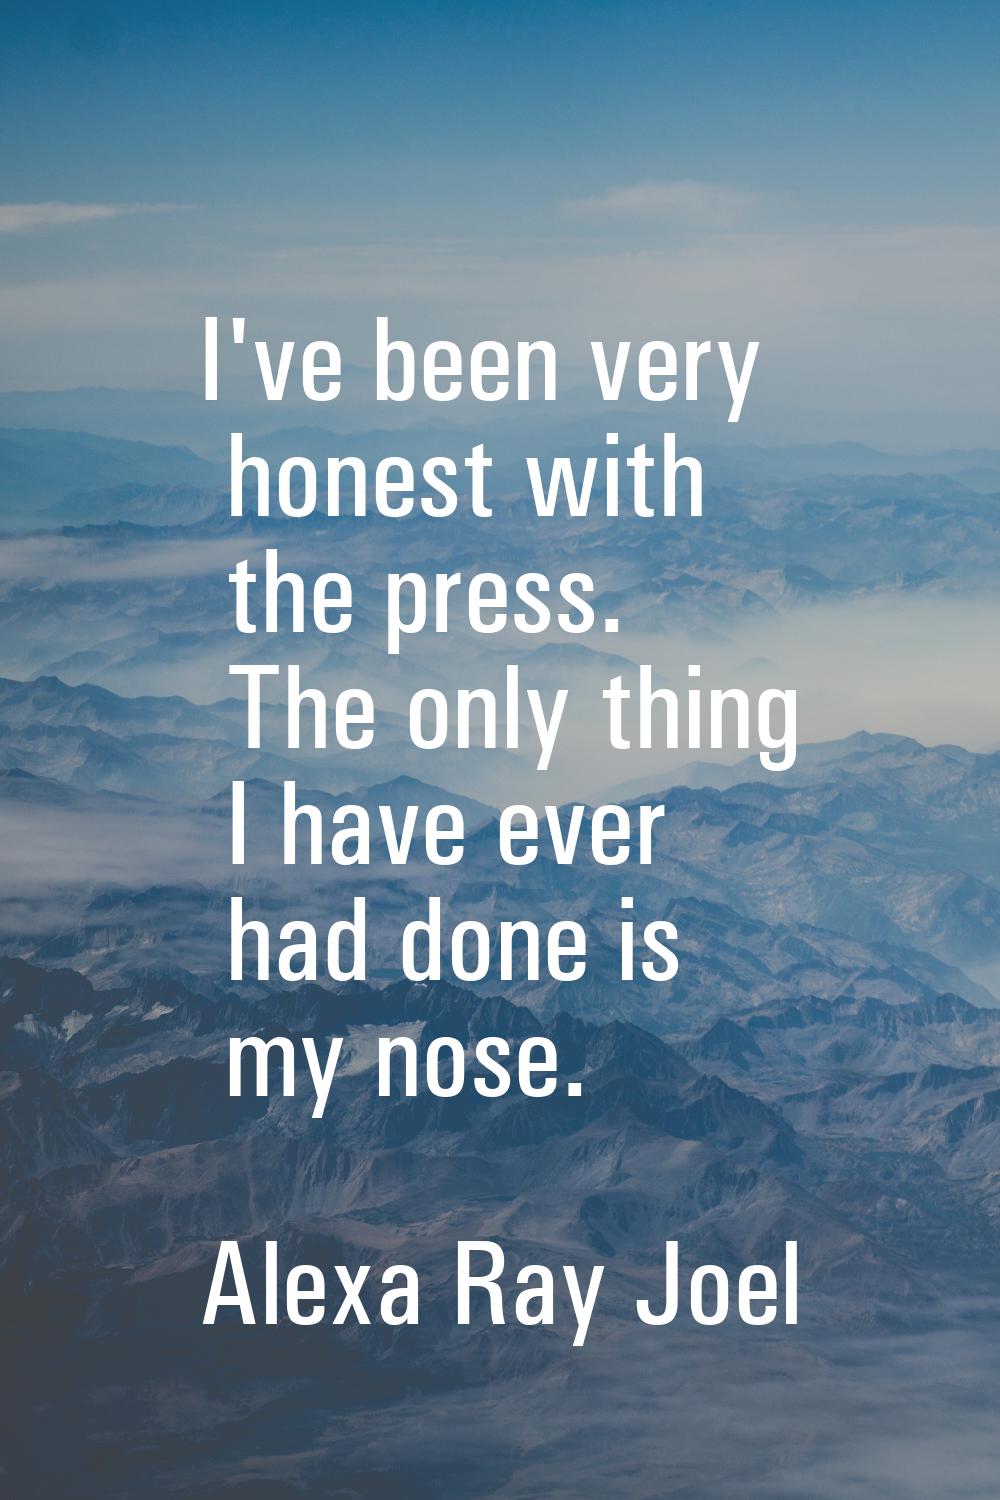 I've been very honest with the press. The only thing I have ever had done is my nose.